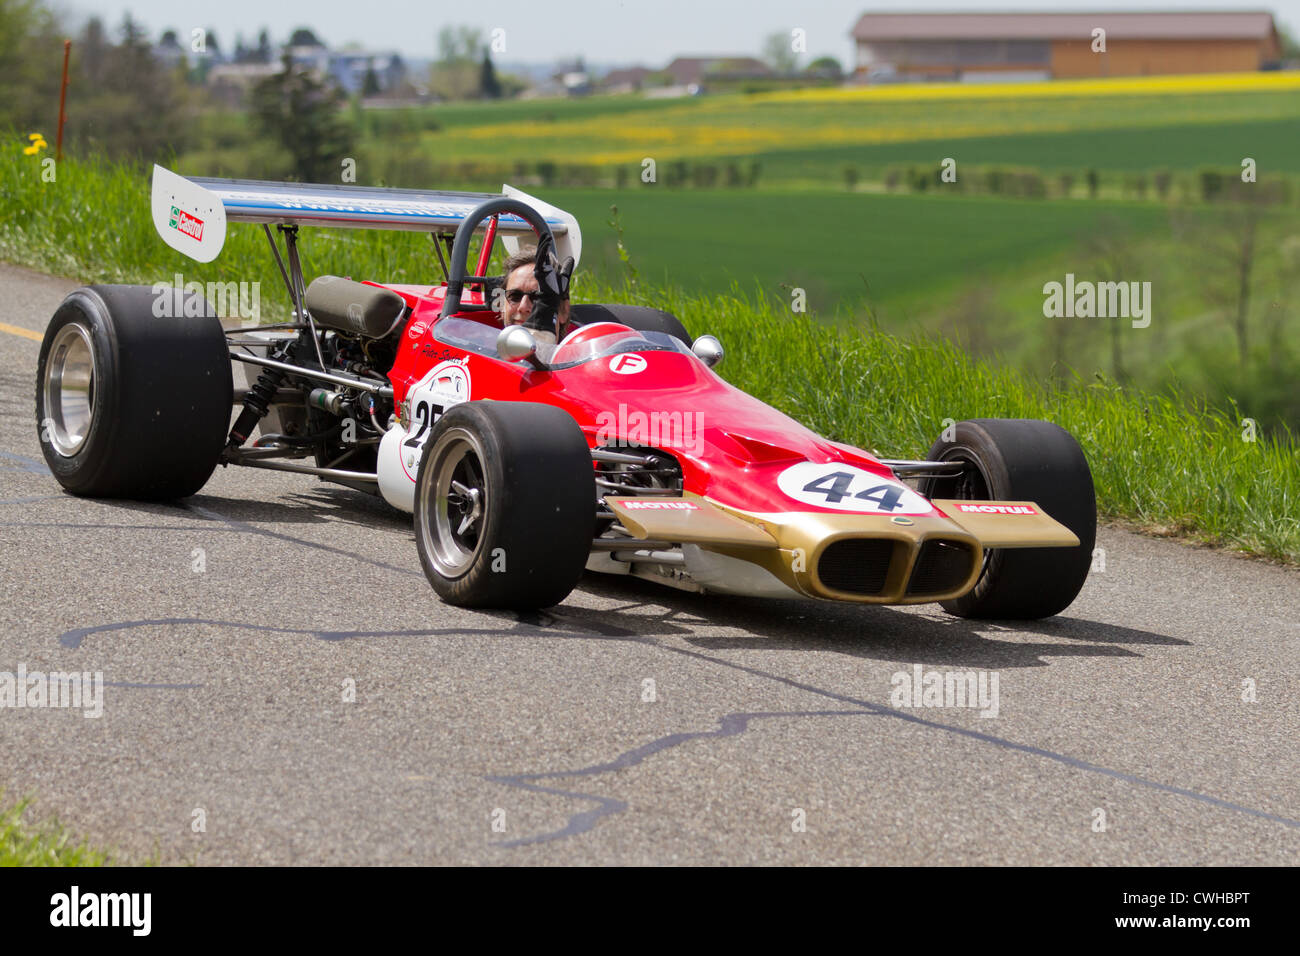 Vintage race car Lotus 59 Formel 2 from 1969 at Grand Prix in Mutschellen, SUI on April 29, 2012. Stock Photo